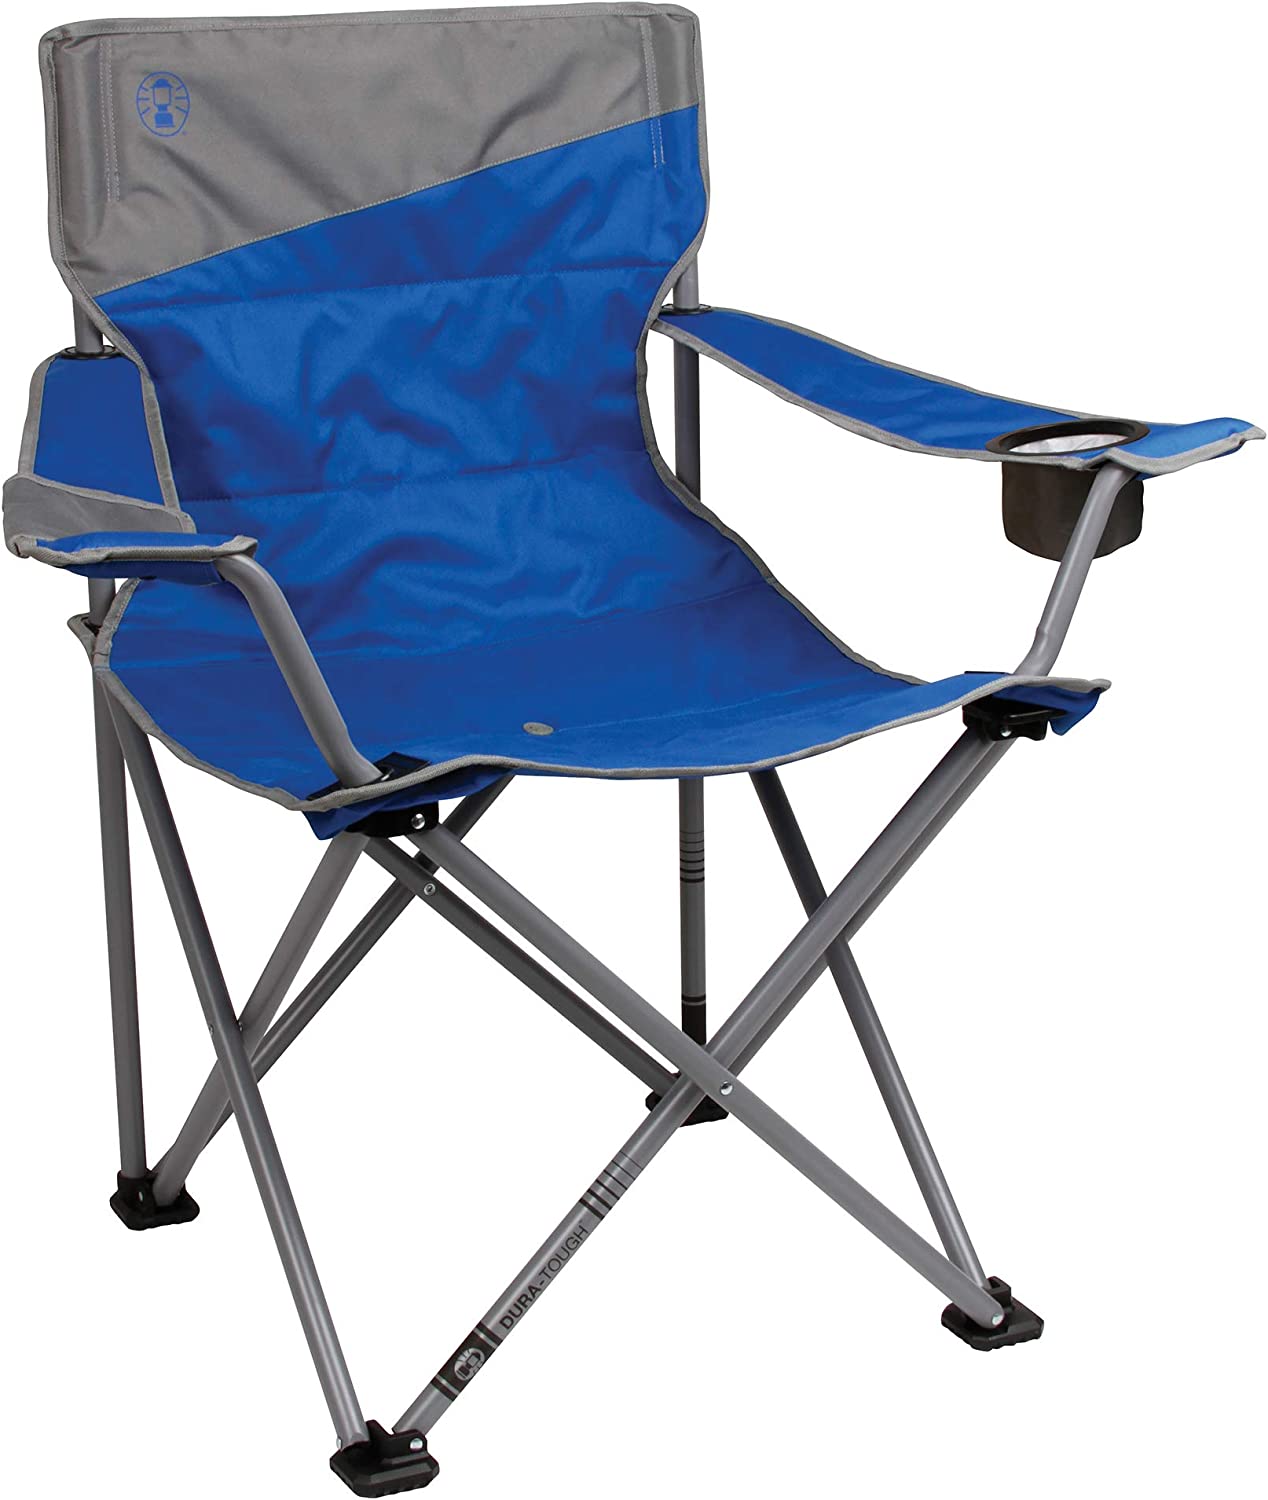 Coleman Big-N-Tall Oversized Quad Camping Chair